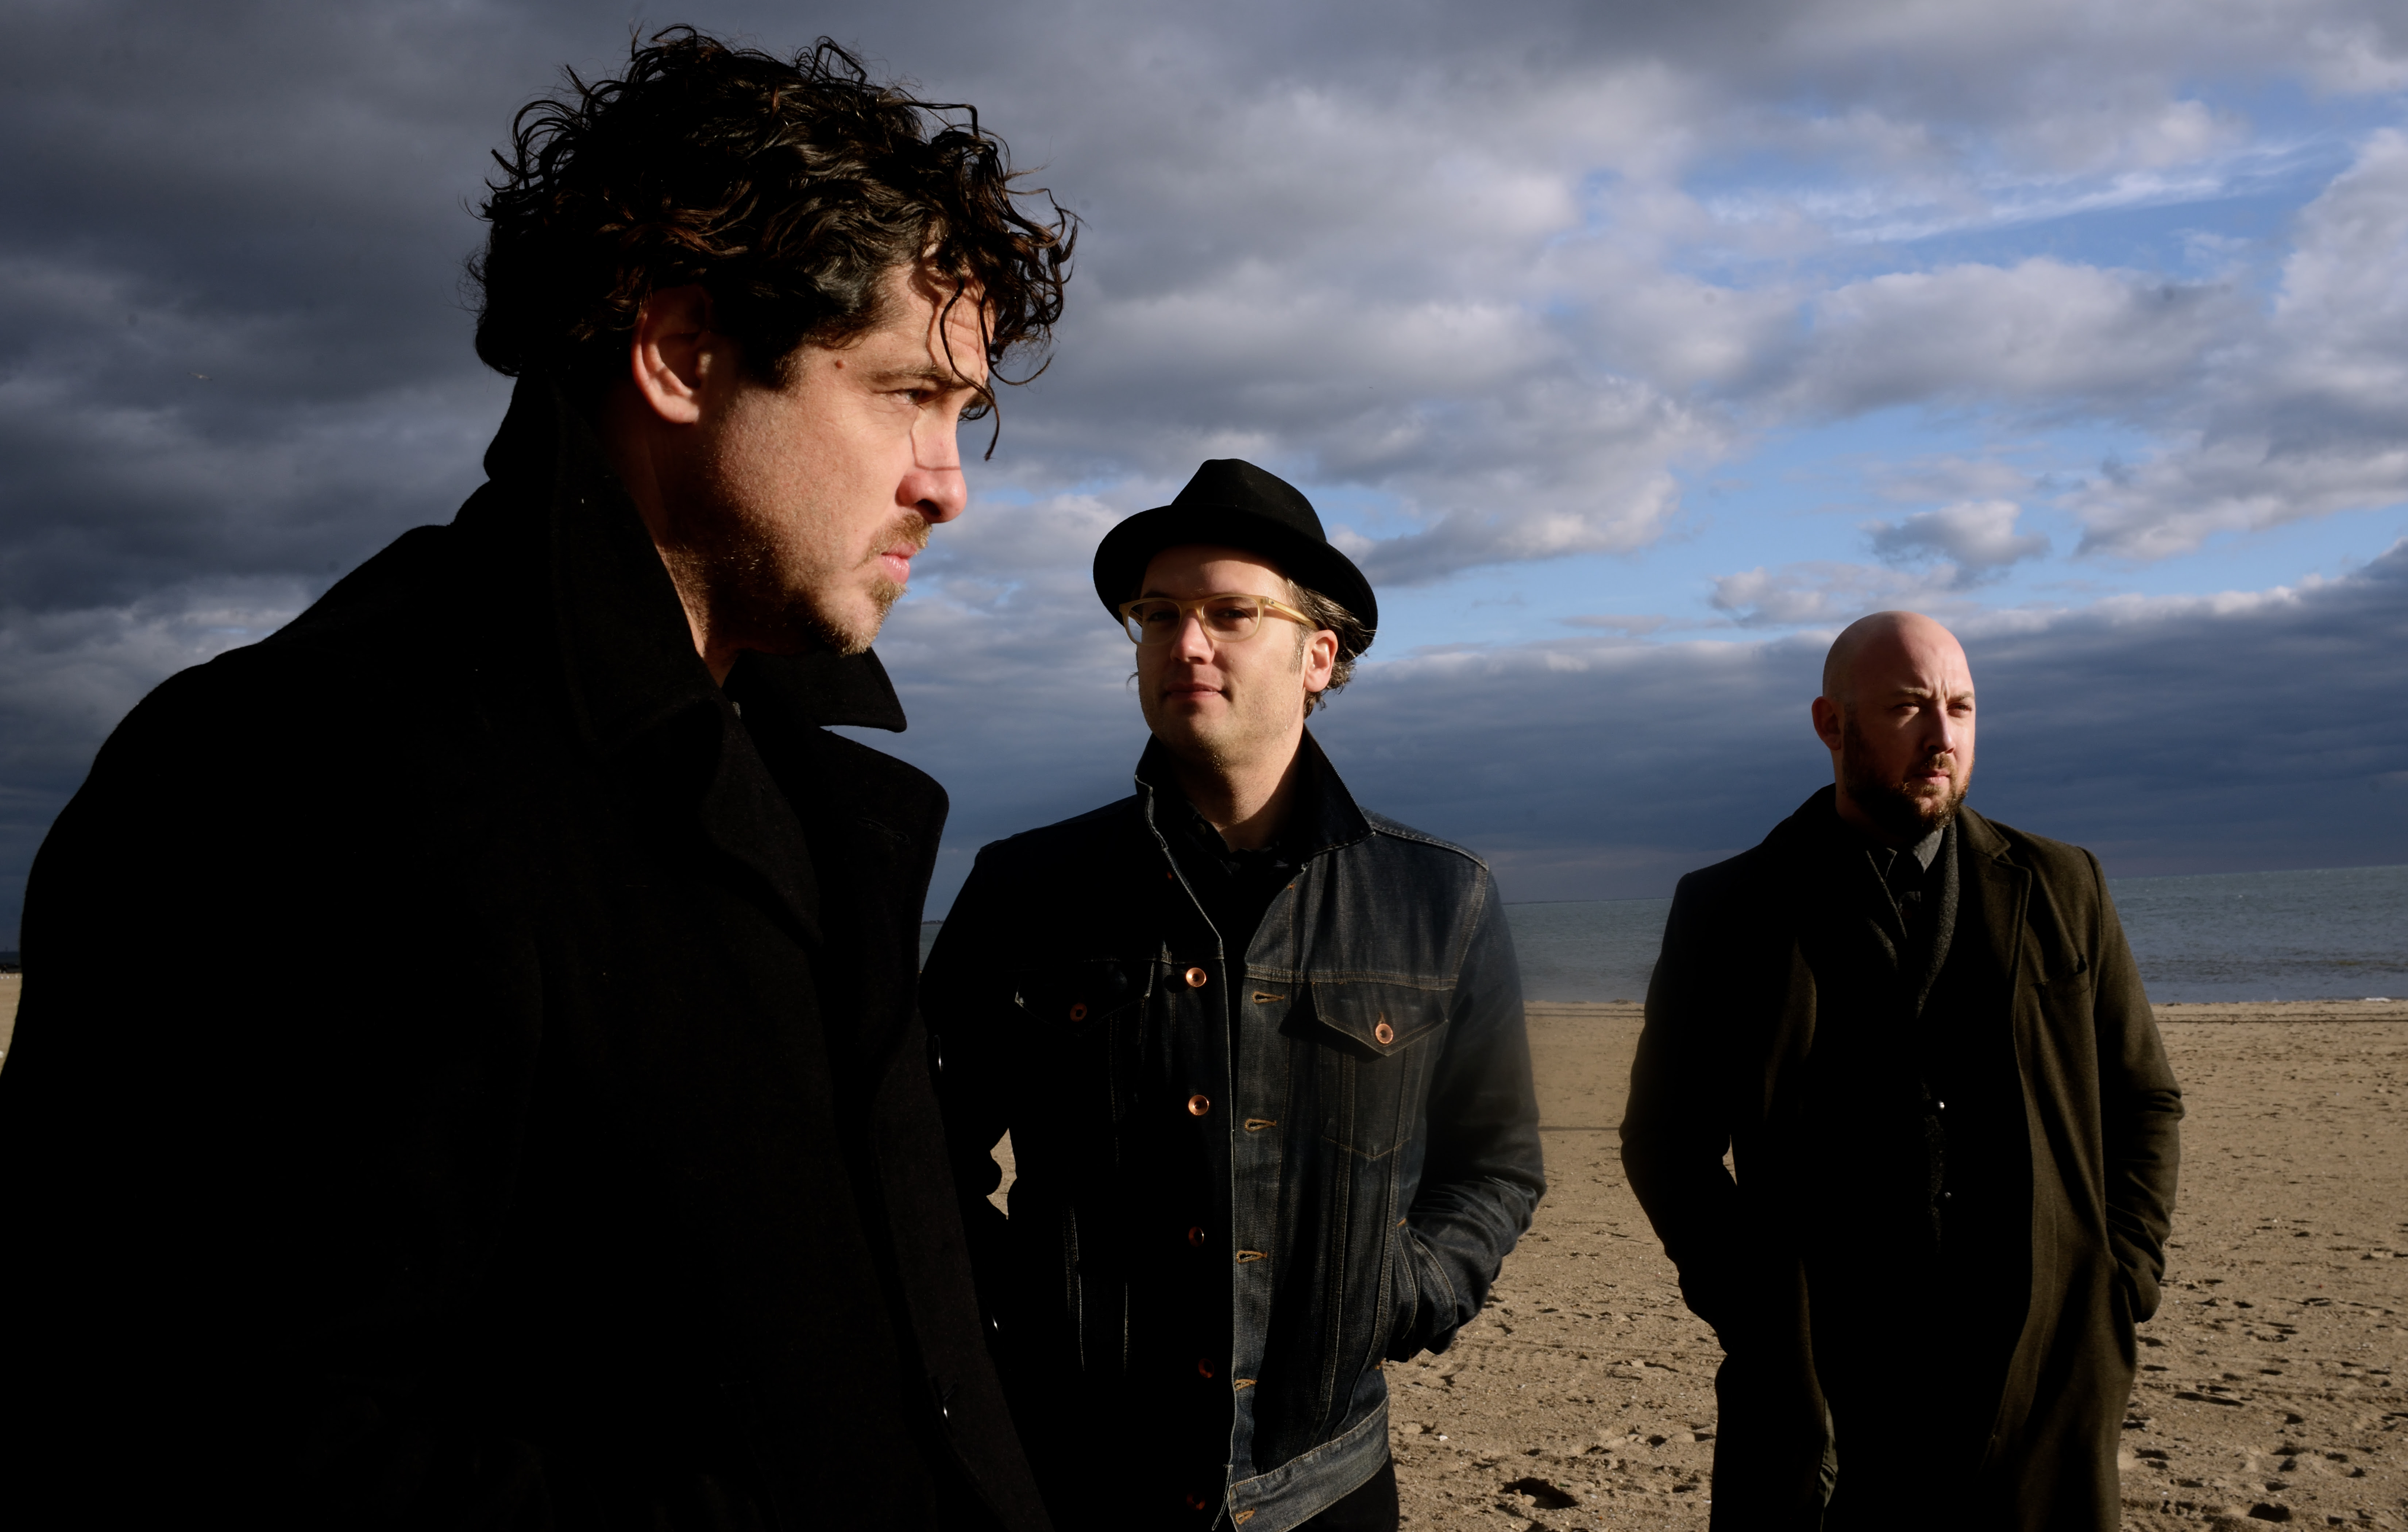 Augustines share single new "Are We Alive" The track comes off Augustines' debut self-titled album for Pias